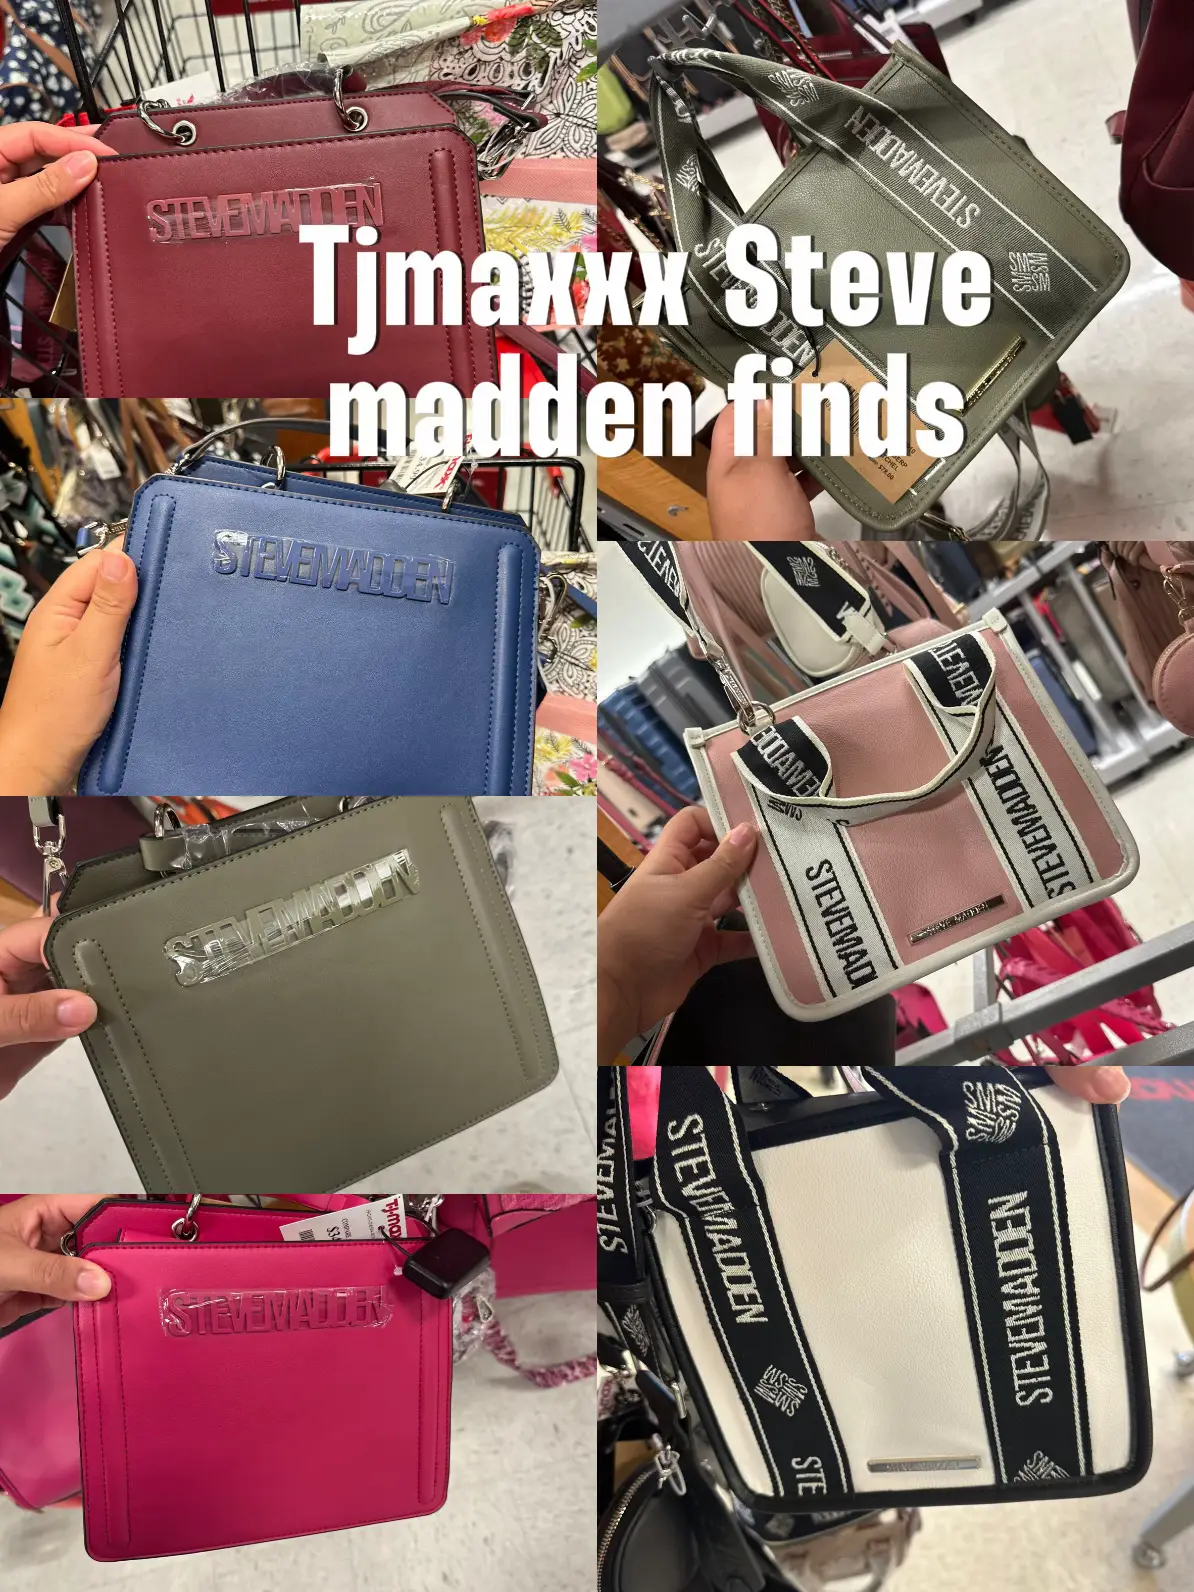 Steven Purse by Steve Madden on sale at TJMaxx. Love this one